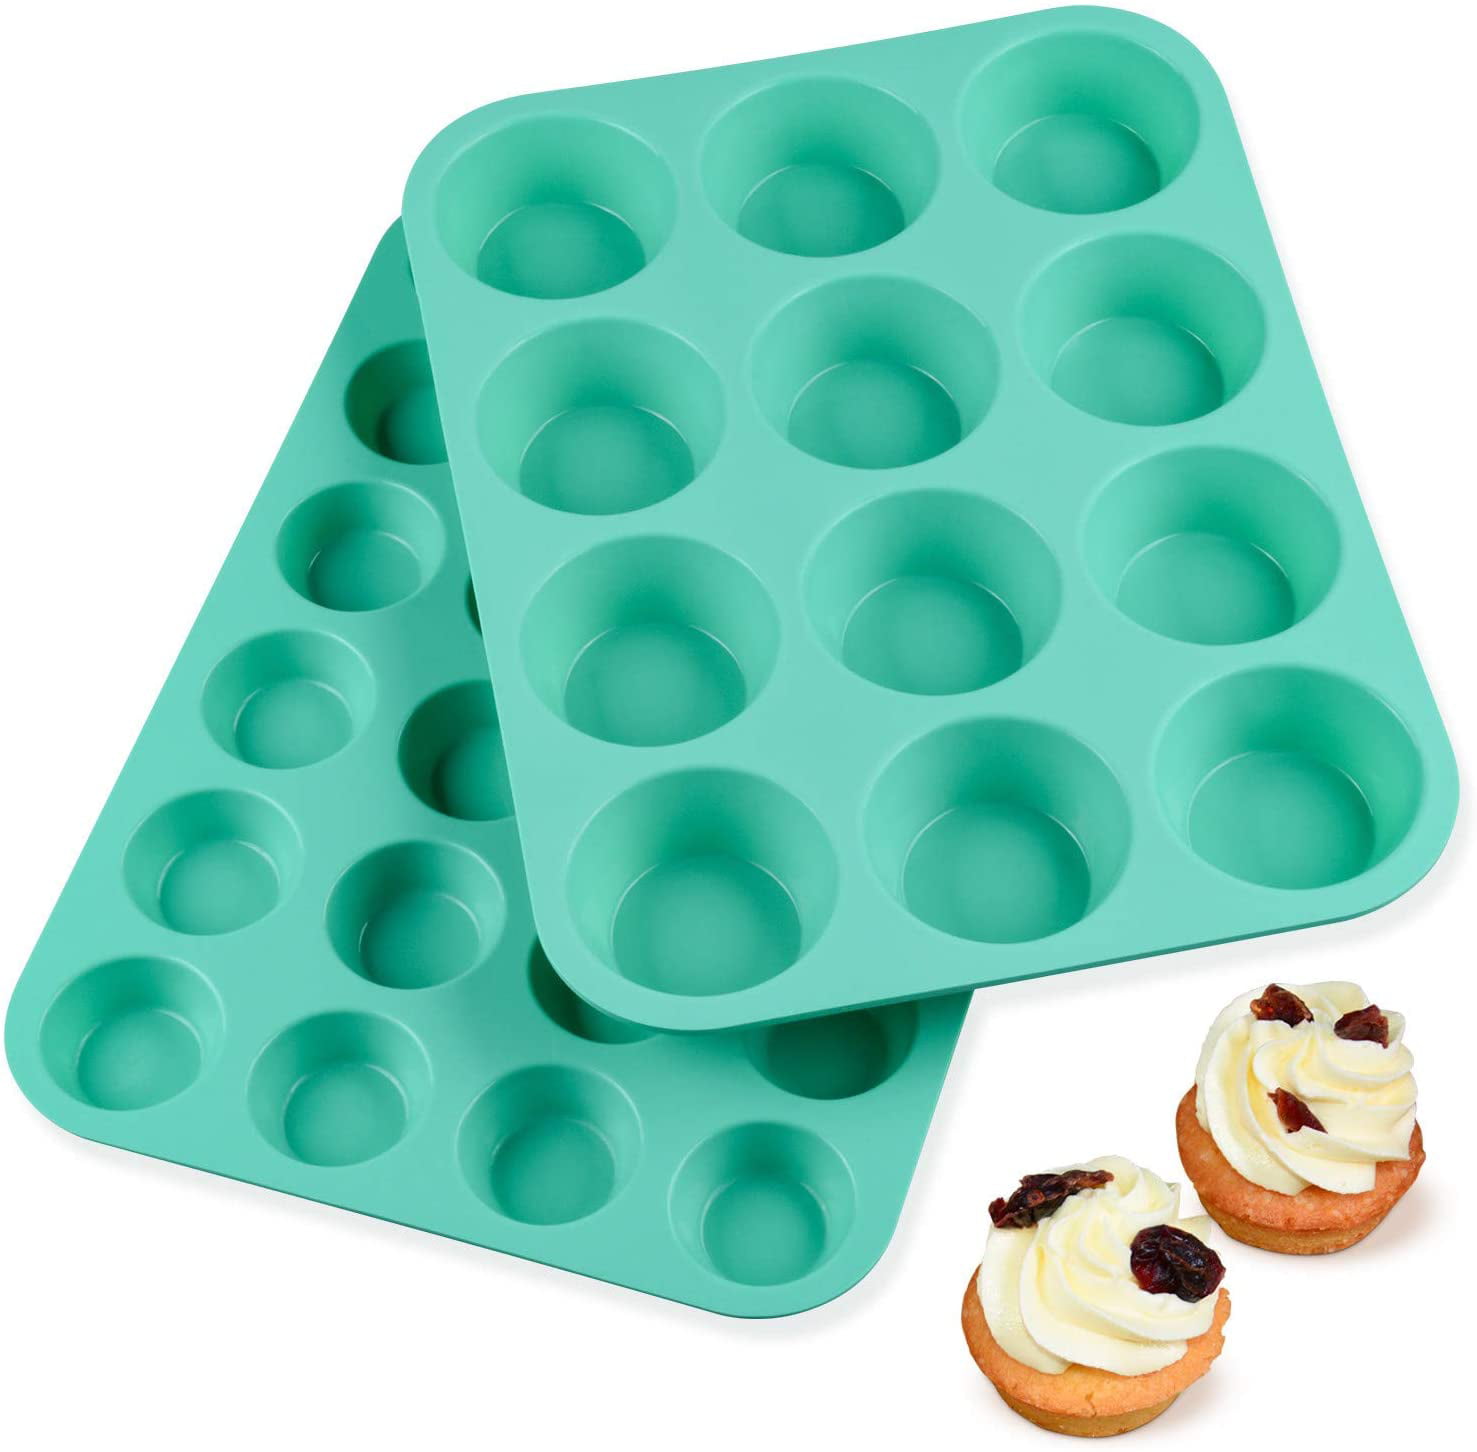 Details about   Silicone Muffin Pan 2-Pack Muffin Tin for European LFGB 12 Cups Cupcake Pan 